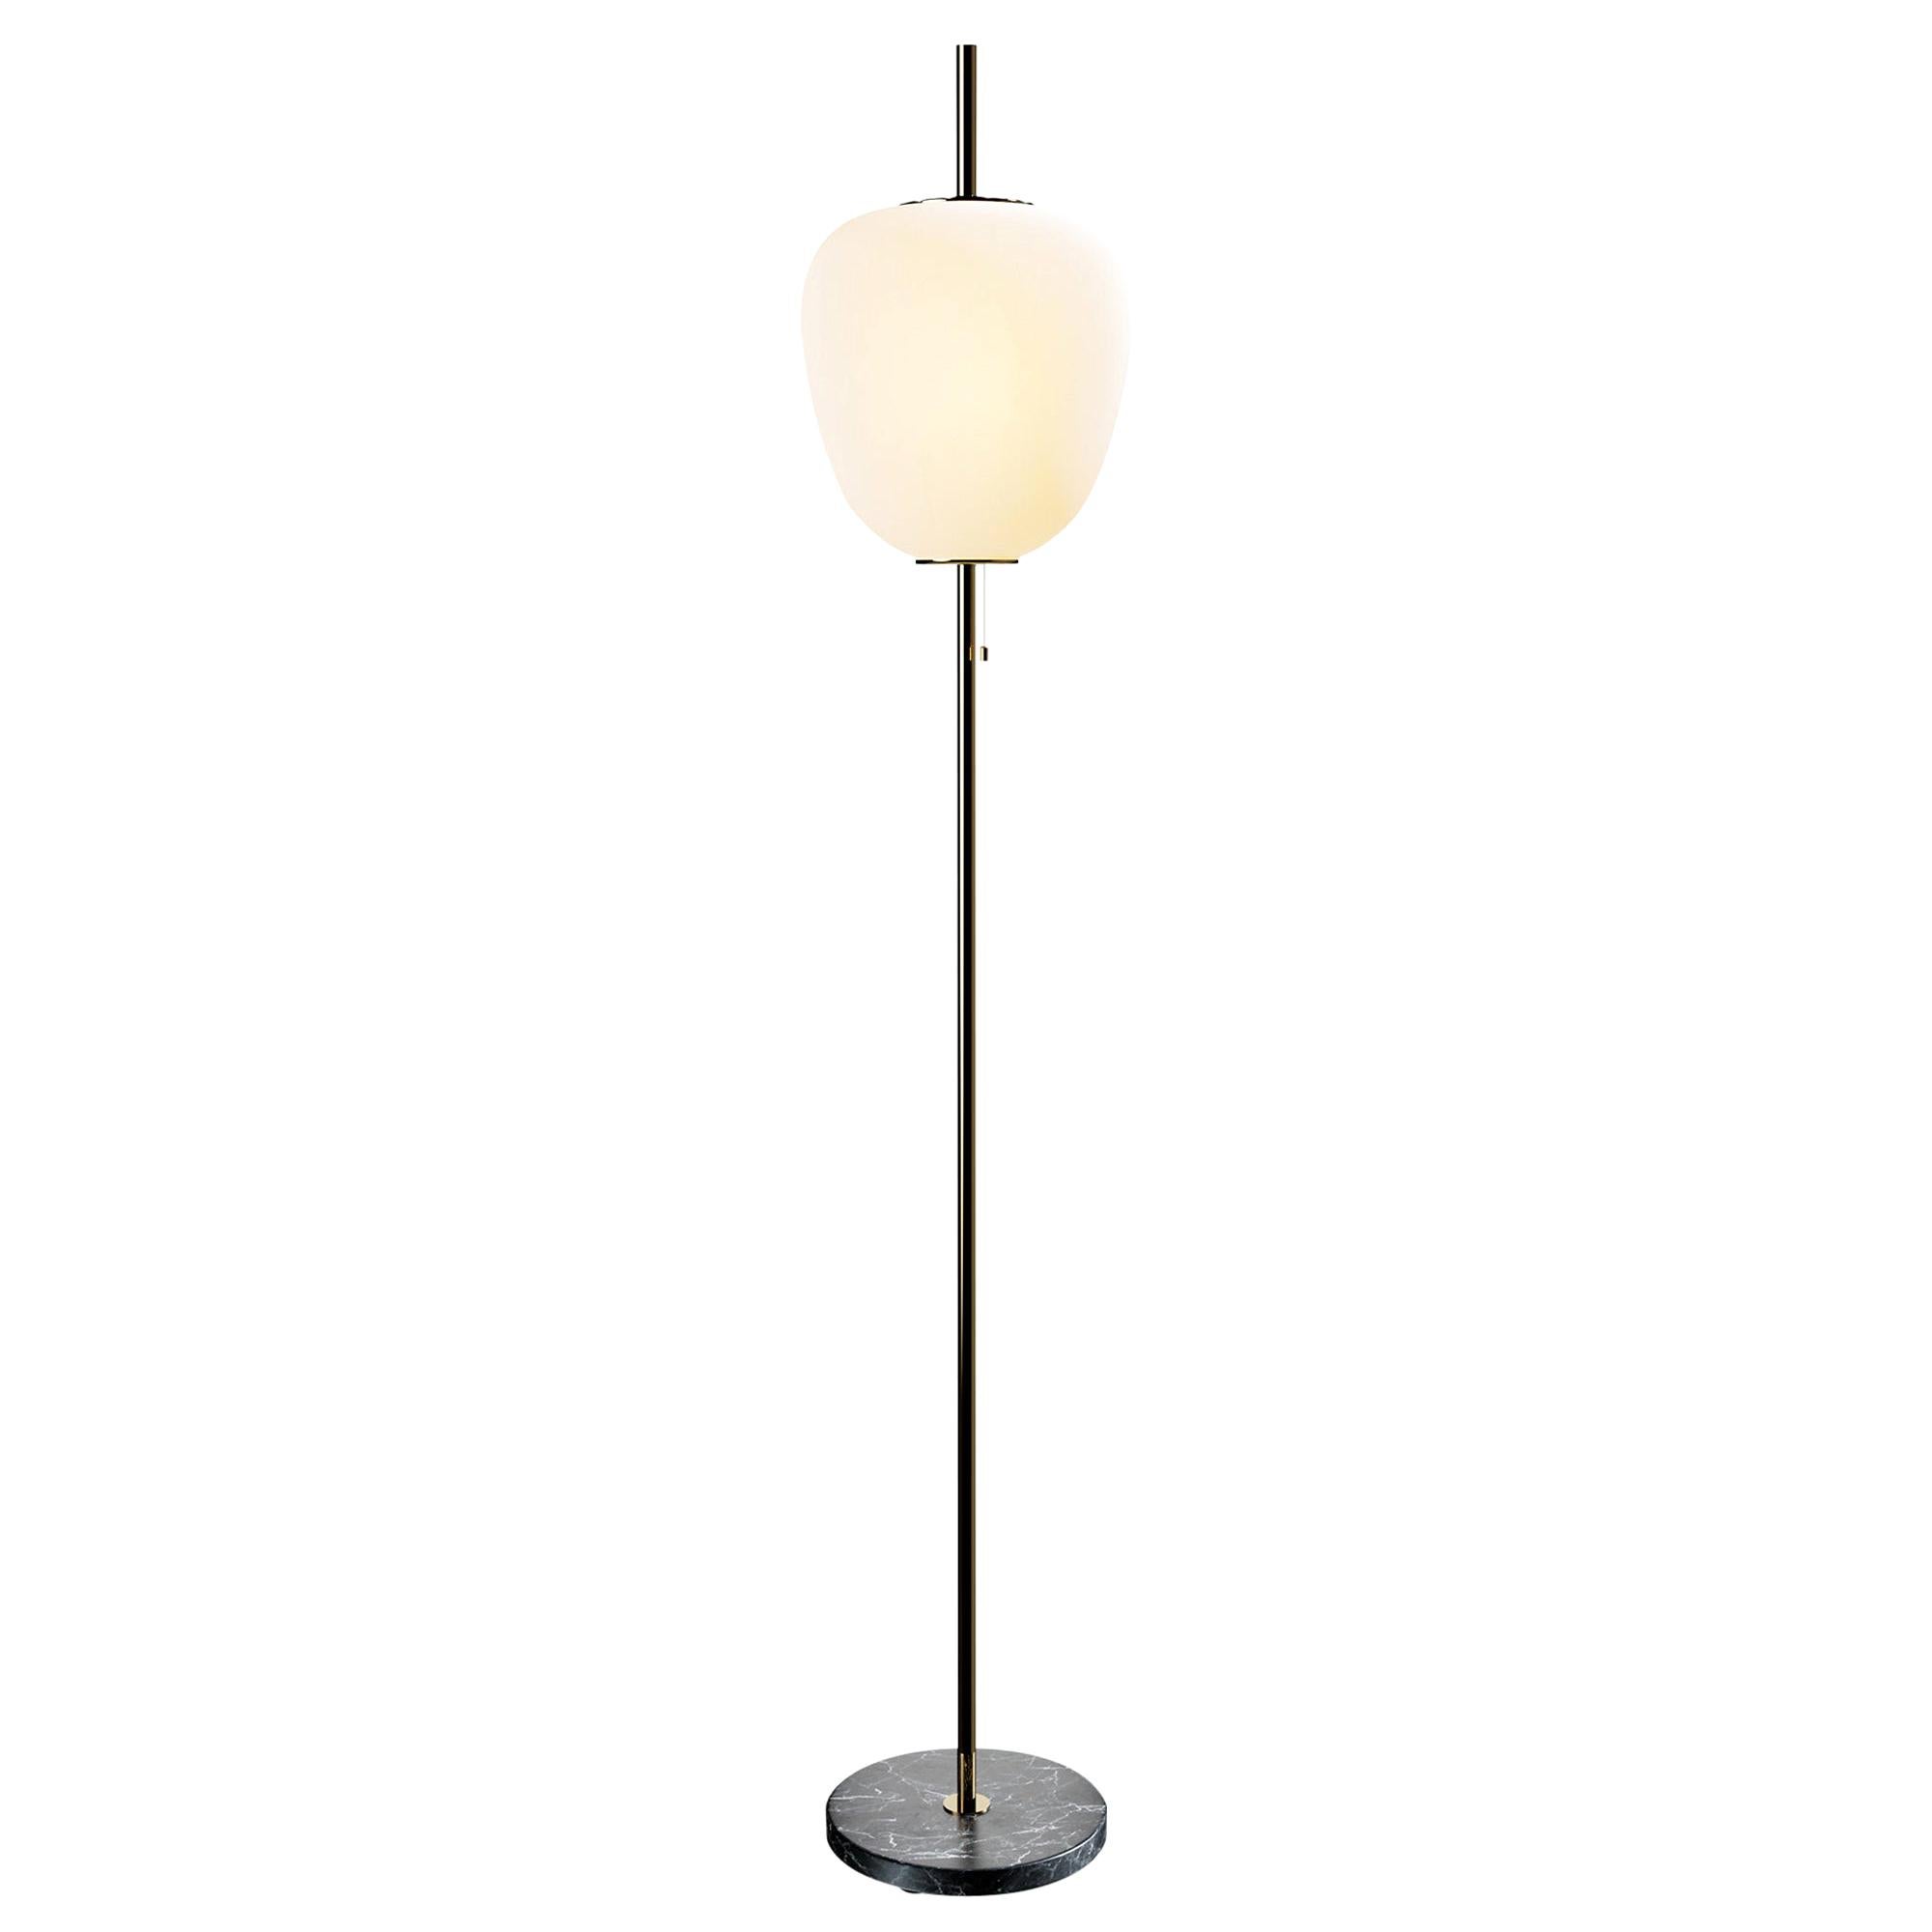 Large Joseph-André Motte J14 floor lamp in polished brass and black marble for Disderot. 

Originally designed in 1957, this sculptural floor lamp is a newly produced numbered edition with authentication certificate made in France by Disderot with